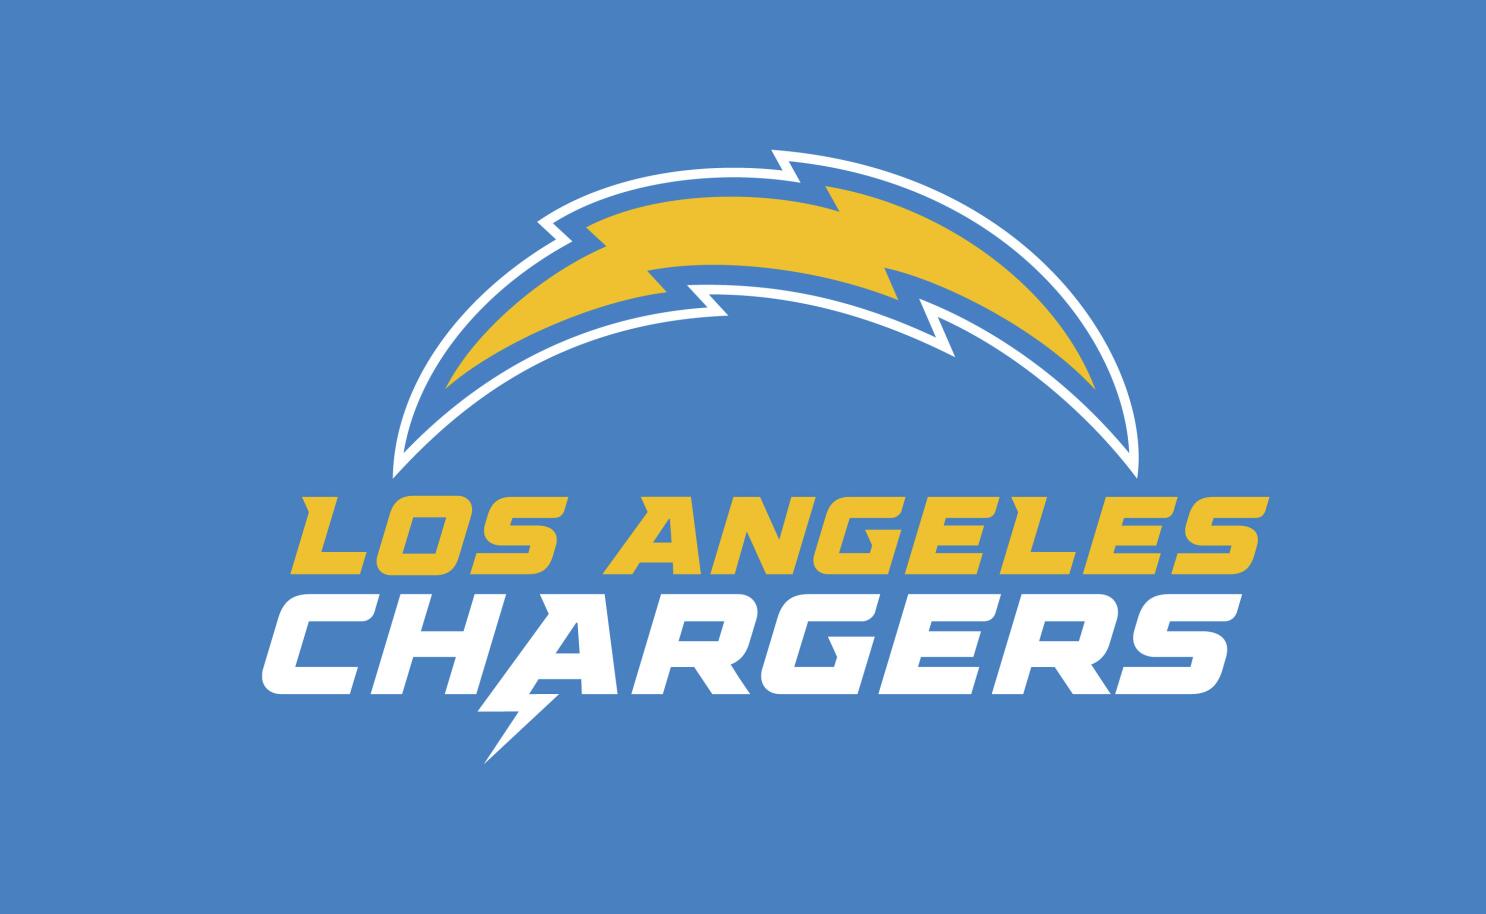 No more searching; Chargers have finally found a talented coach to replace Brandon Staley…